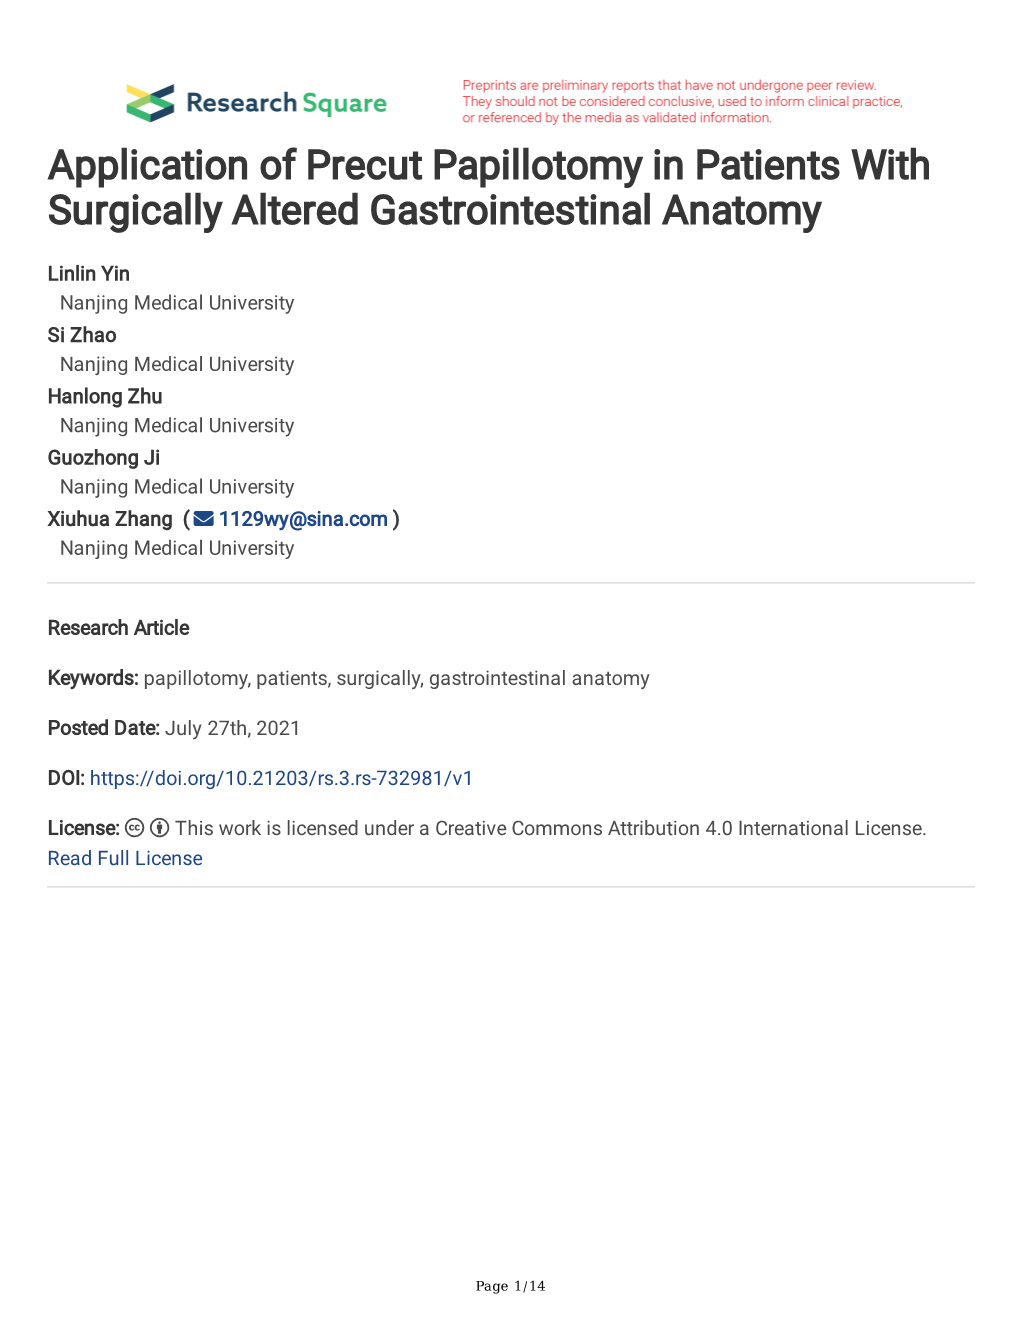 Application of Precut Papillotomy in Patients with Surgically Altered Gastrointestinal Anatomy